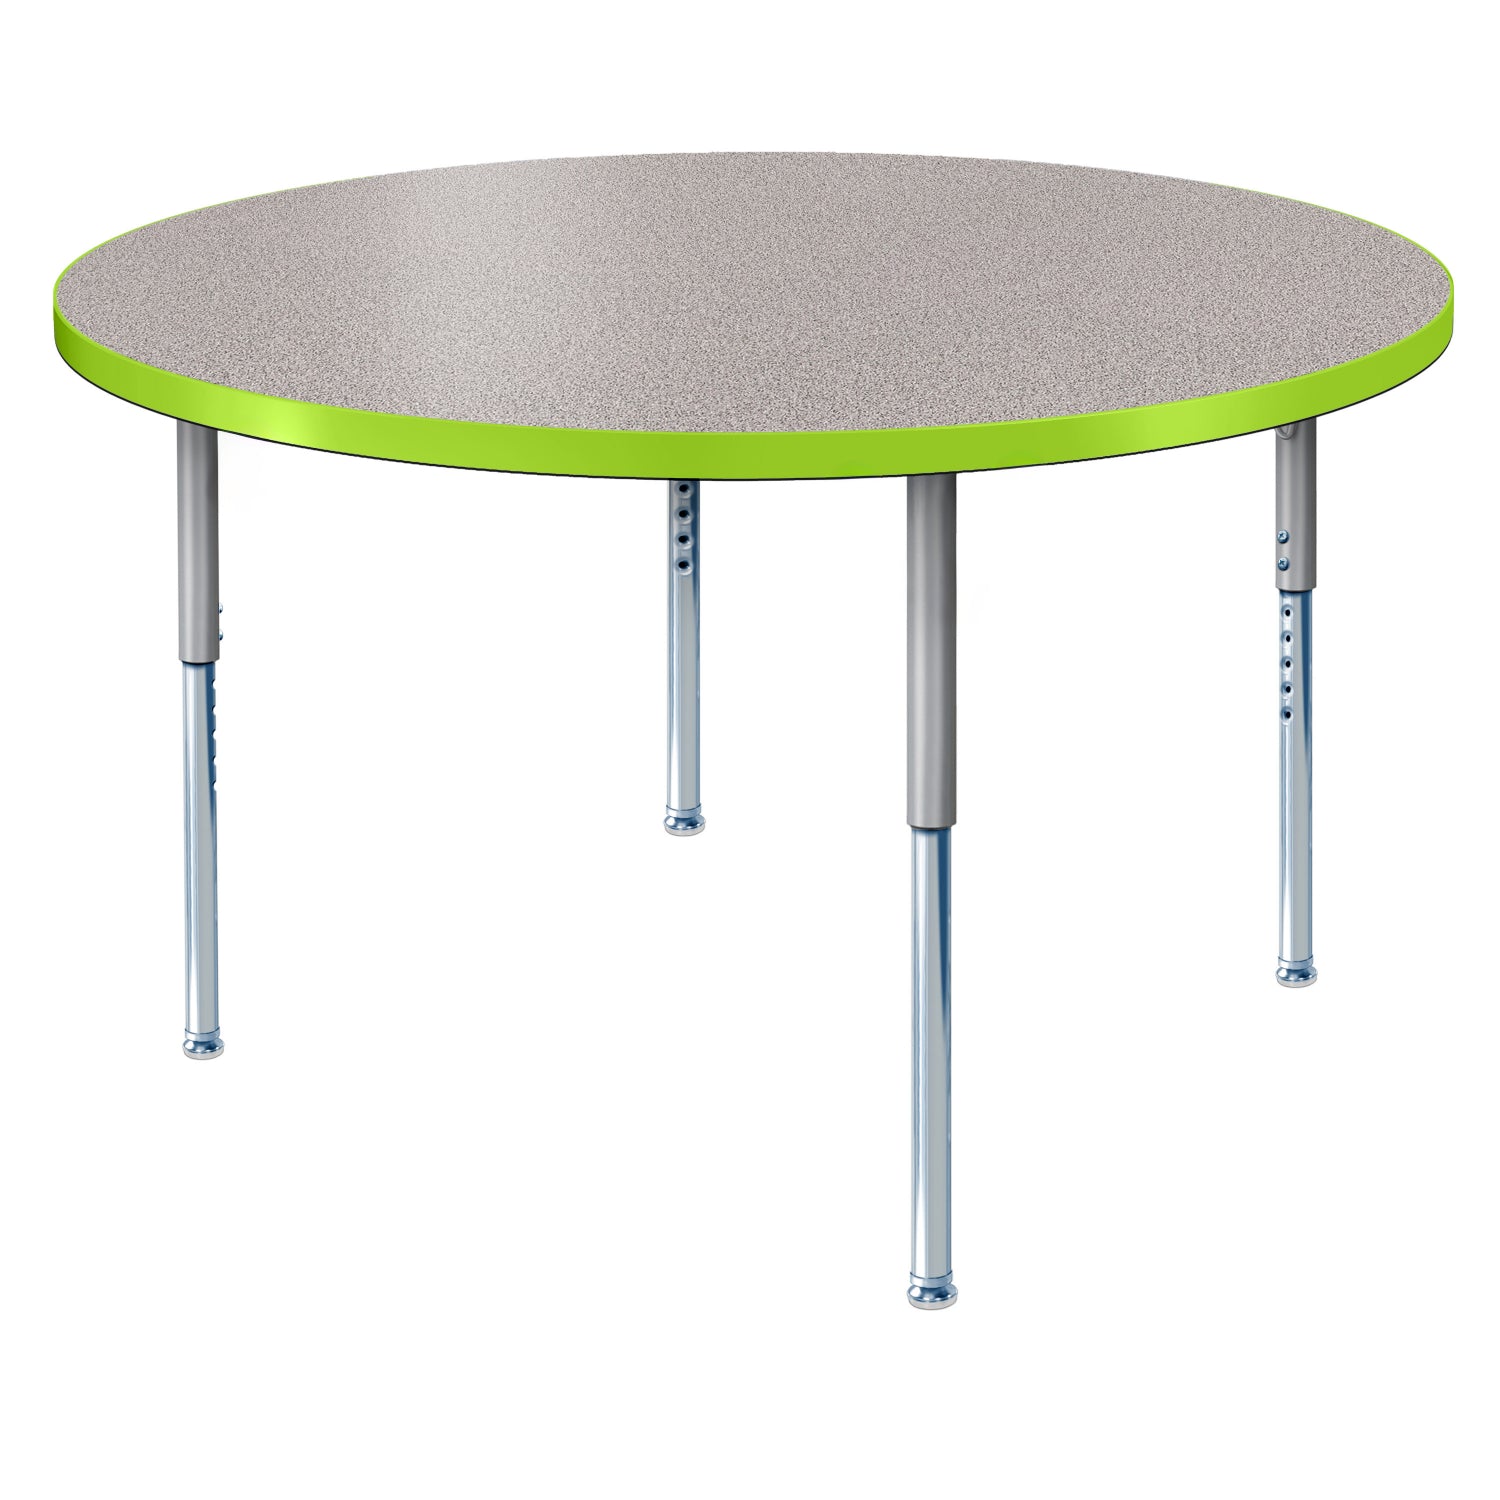 Modern Classic Series 48" Circle Activity Table with High Pressure Laminate Top, Adjustable Height Legs